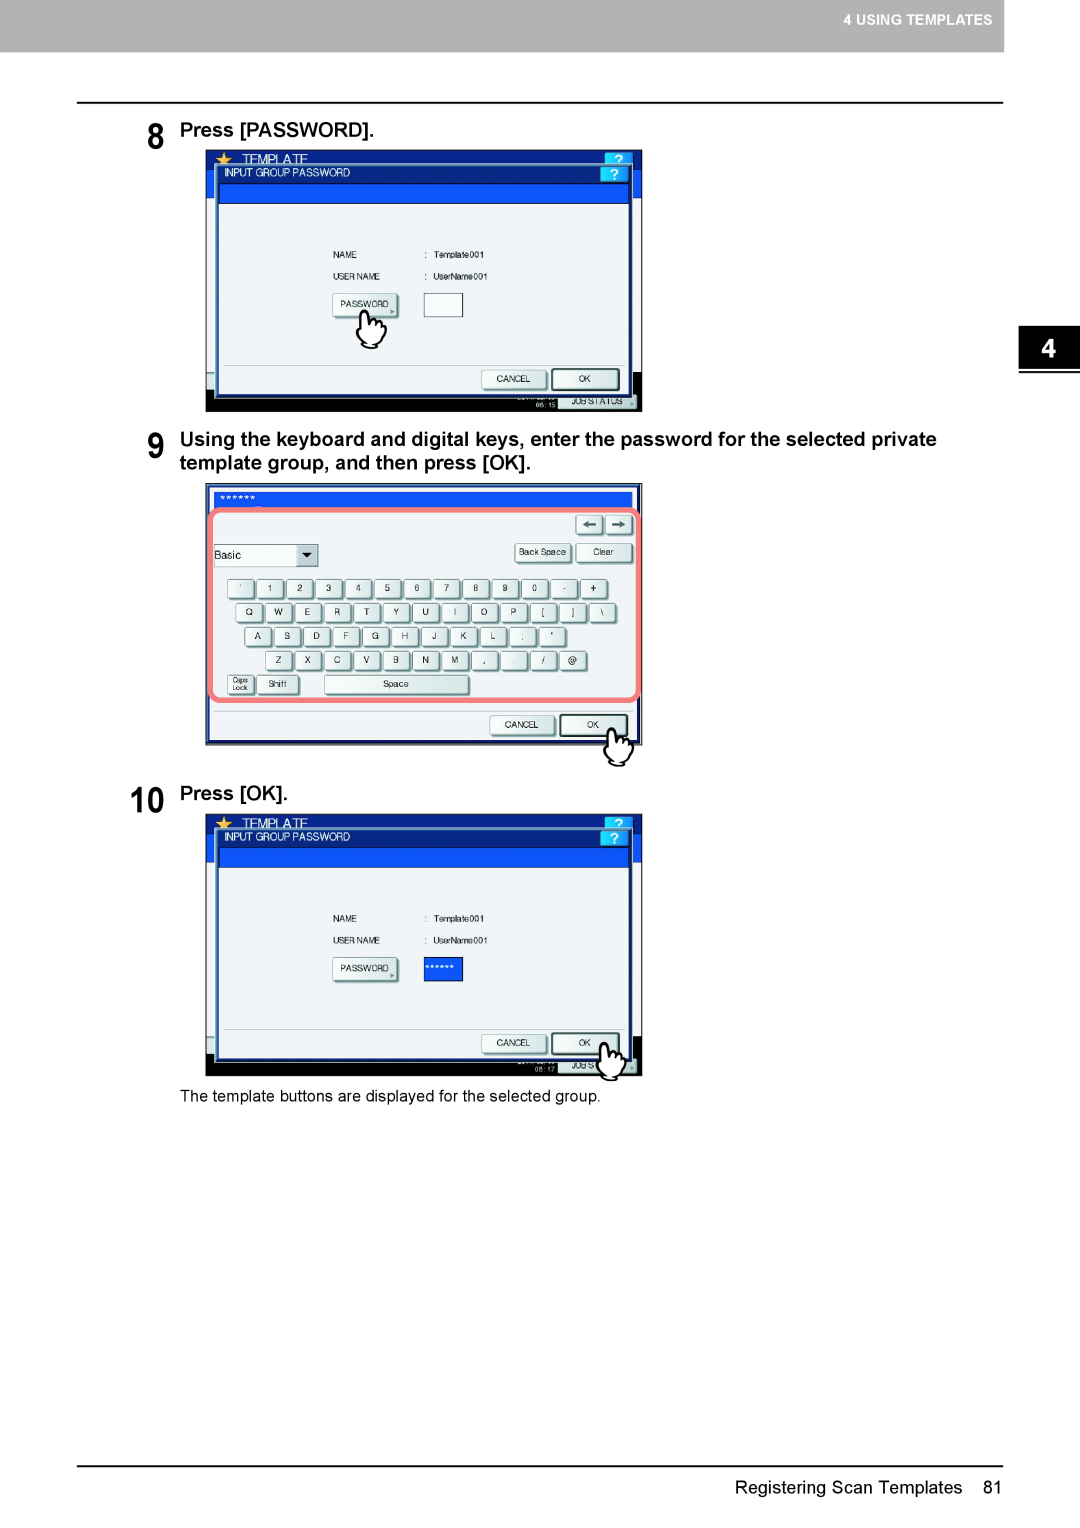 Toshiba 256SE, 6540C Press PASSWORD, Press OK, The template buttons are displayed for the selected group, Using Templates 